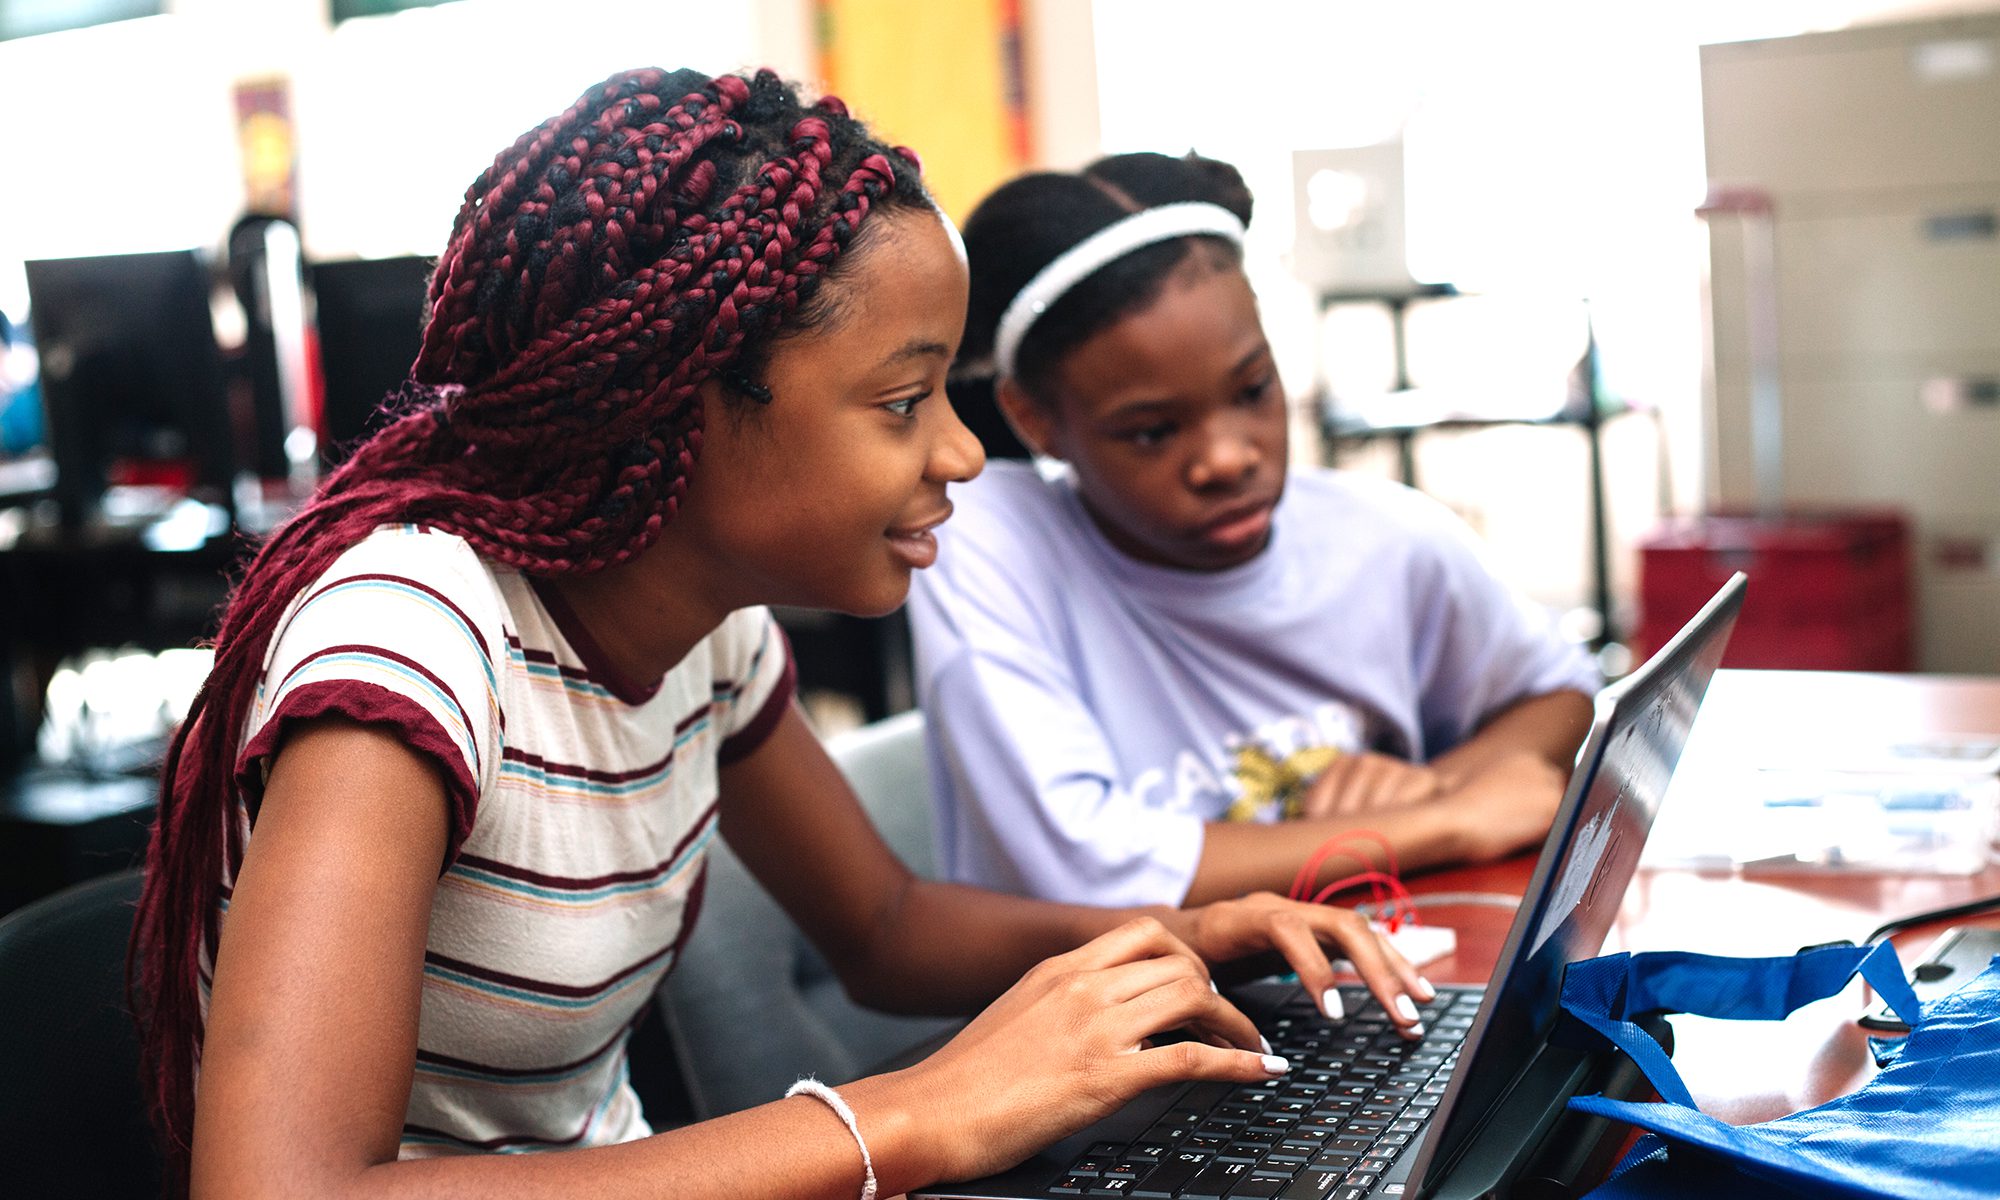 Two AA female youth look at a computer in class